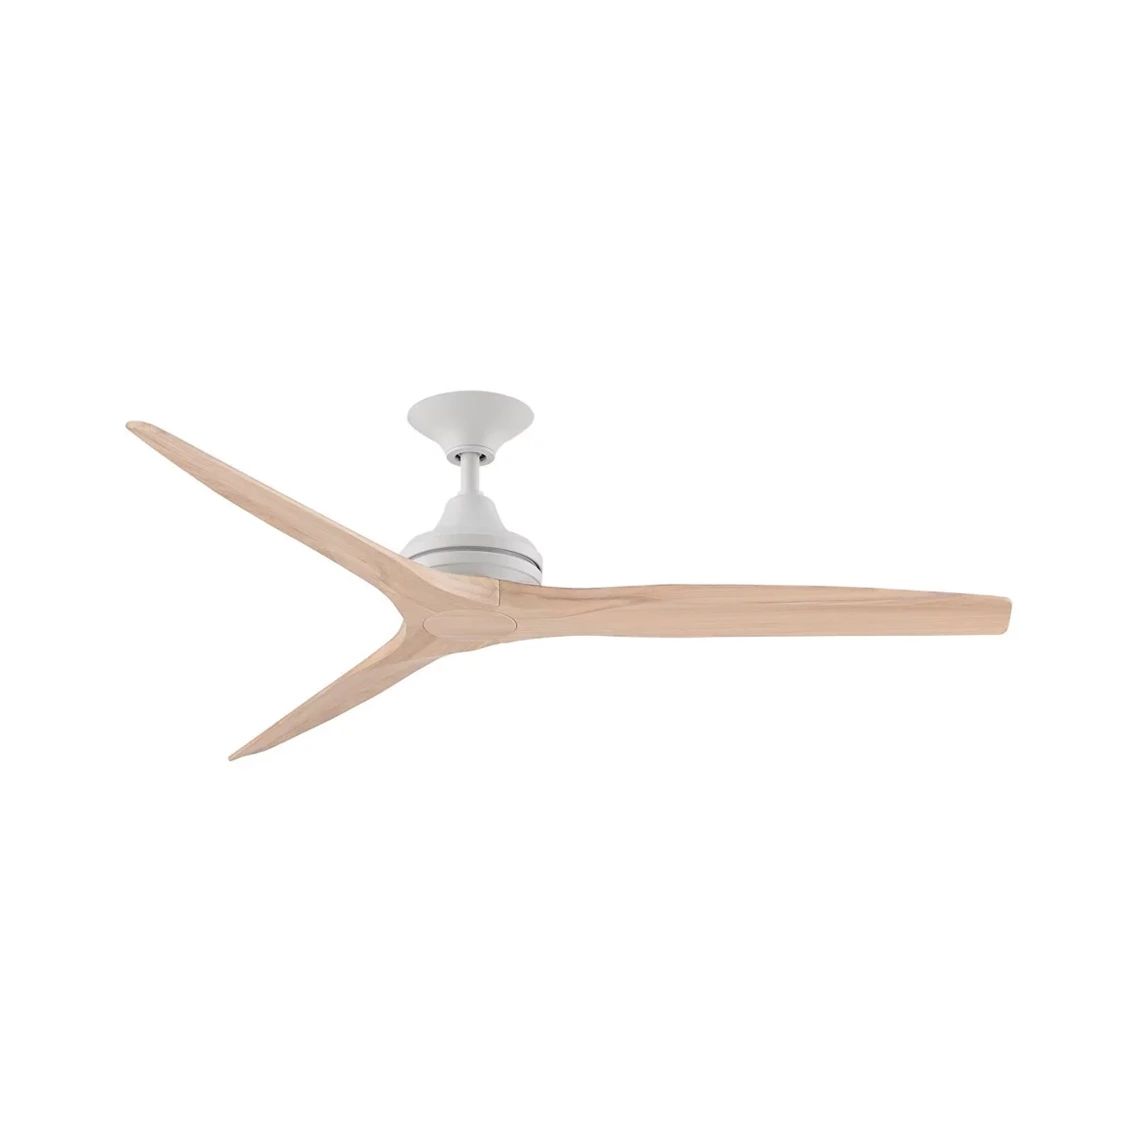 48" Indoor/Outdoor Metal and Wood Ceiling Fan | Shades of Light